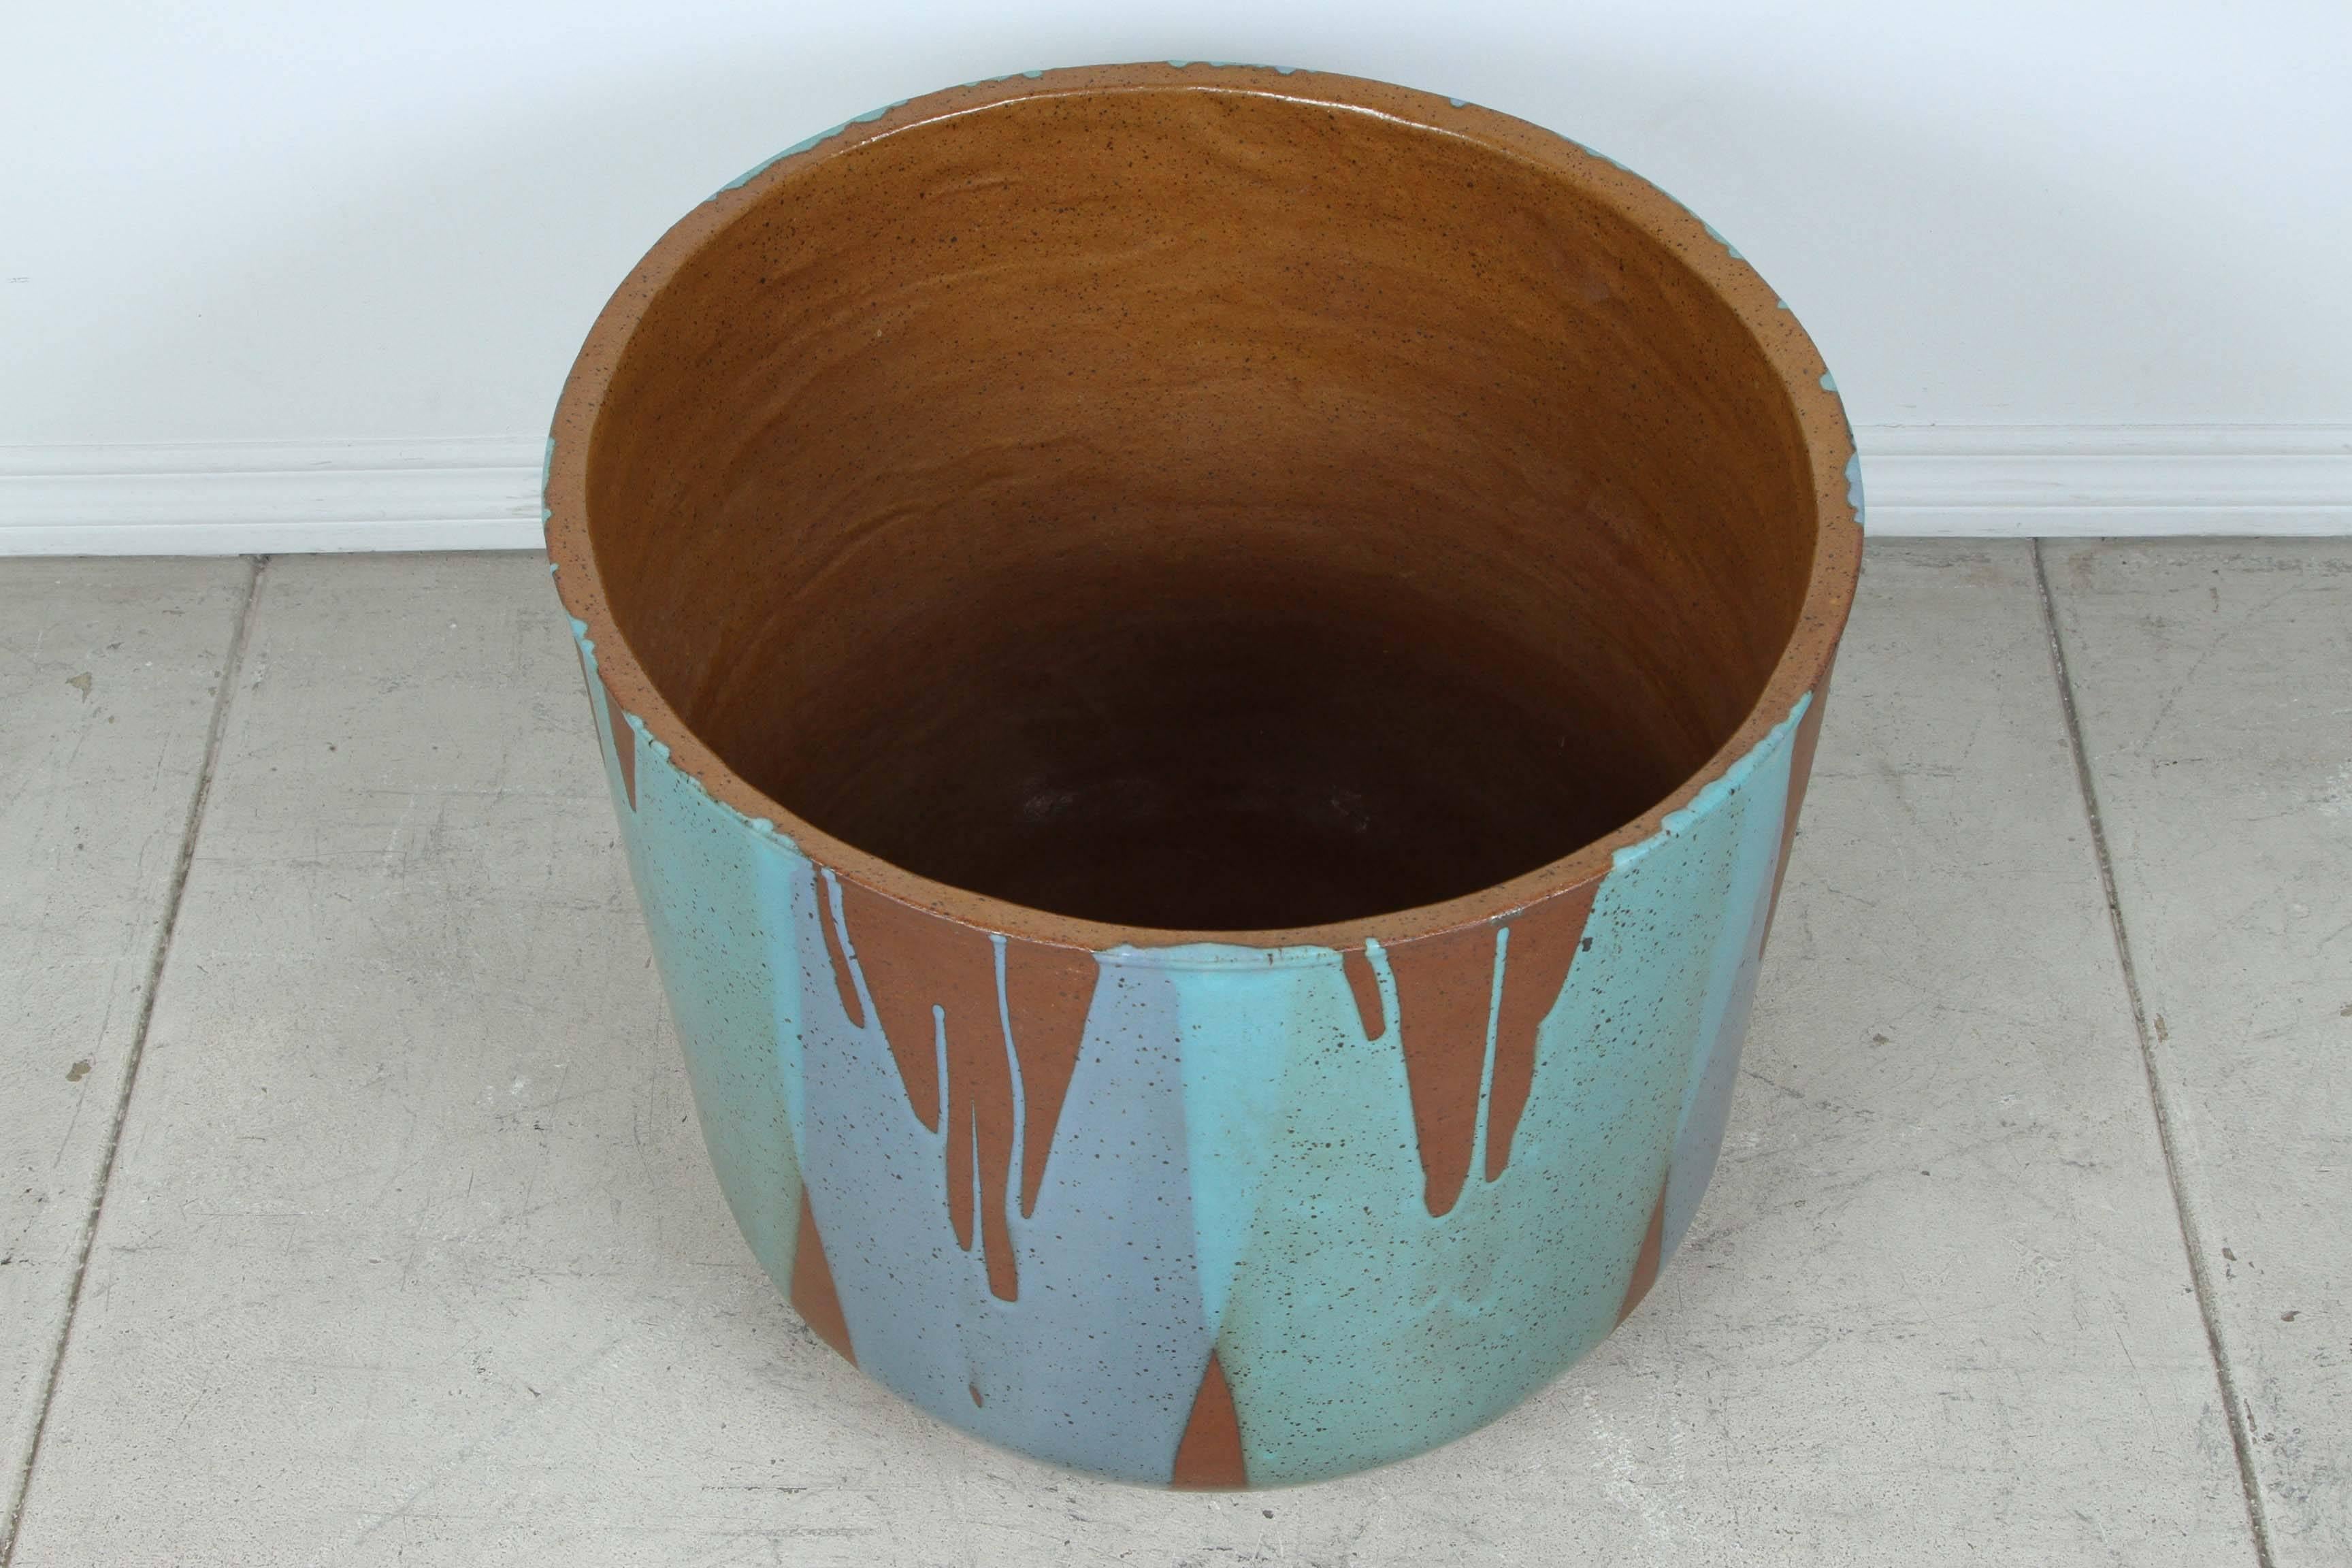 Large David Cressey planter for Architectural Pottery. Two color (blue and teal) flame glaze over unglazed outer body with glazed interior. This is model number 4108 from the Architectural Pottery catalog with custom glaze colors.